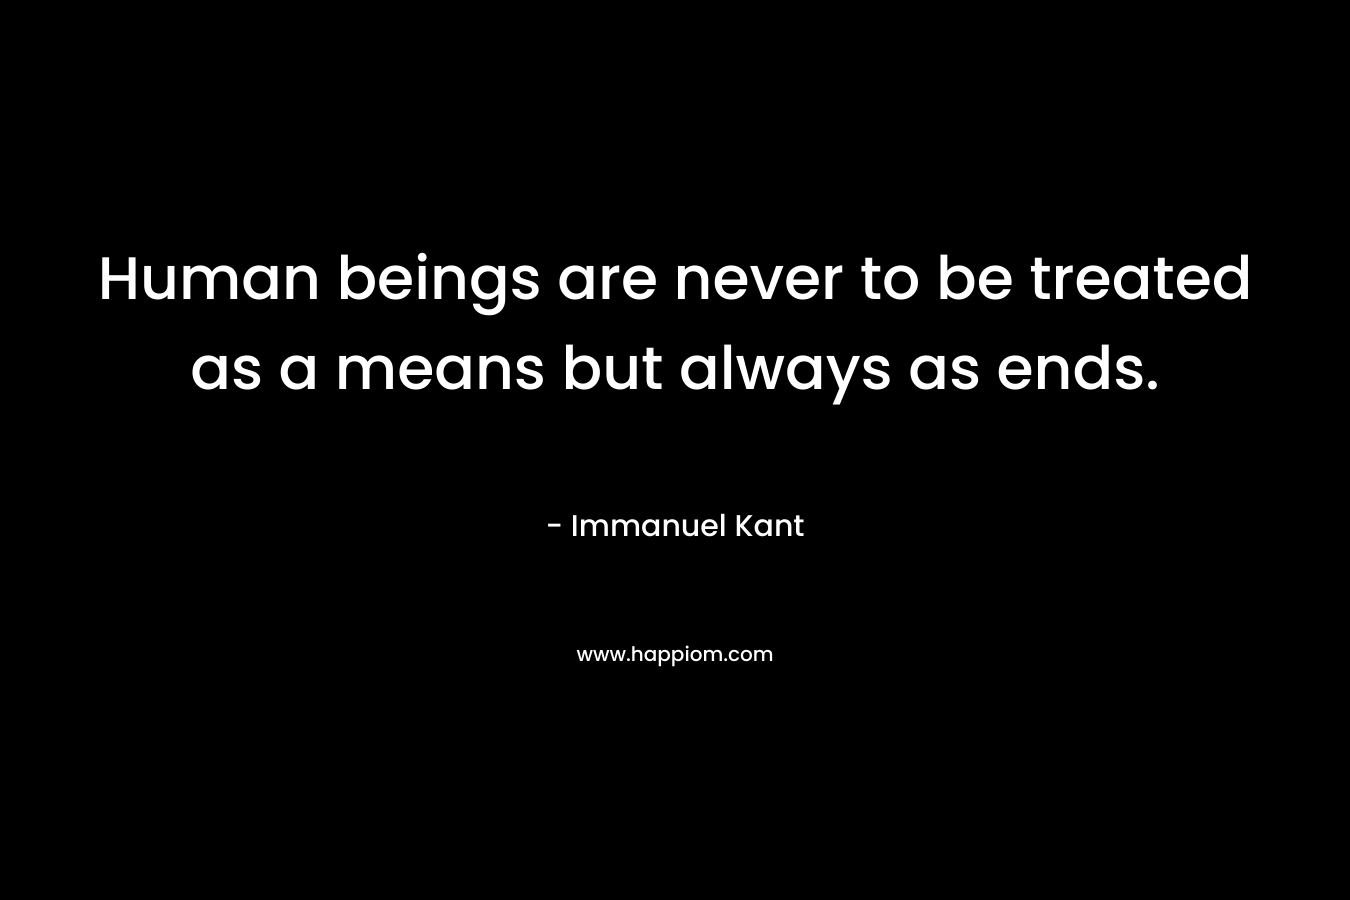 Human beings are never to be treated as a means but always as ends. – Immanuel Kant